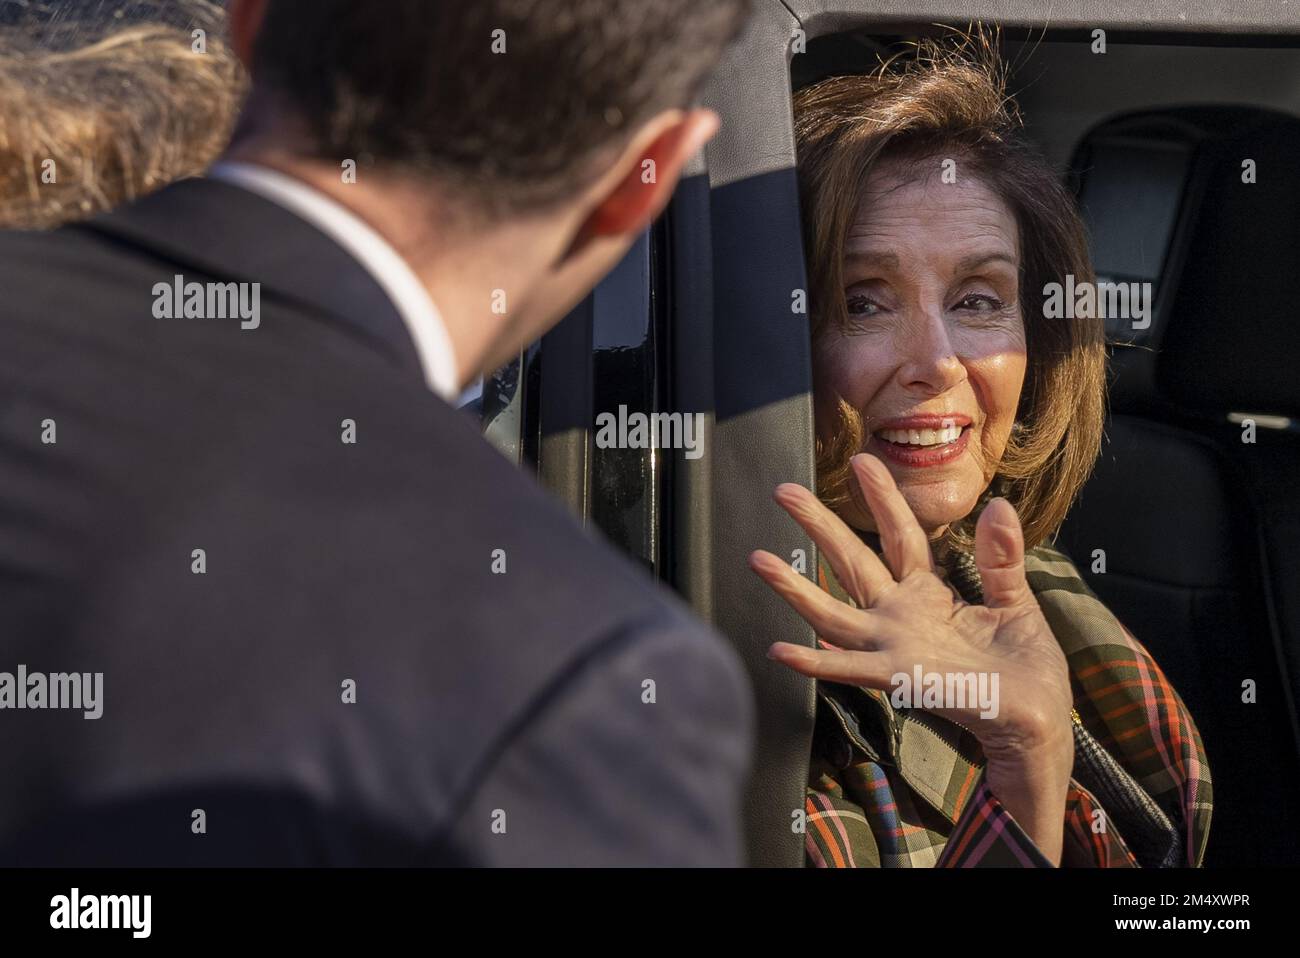 Washington DC, USA. 23rd Dec, 2022. Speaker of the United States House of Representatives Nancy Pelosi D-CA., waves bye to staff from her vehicle on Capitol Hill in Washington, DC on Friday, December 23, 2022. Pelosi will no longer be Speaker of the House once Republicans are a majority of the House next year. Photo by Ken Cedeno/UPI Credit: UPI/Alamy Live News Stock Photo